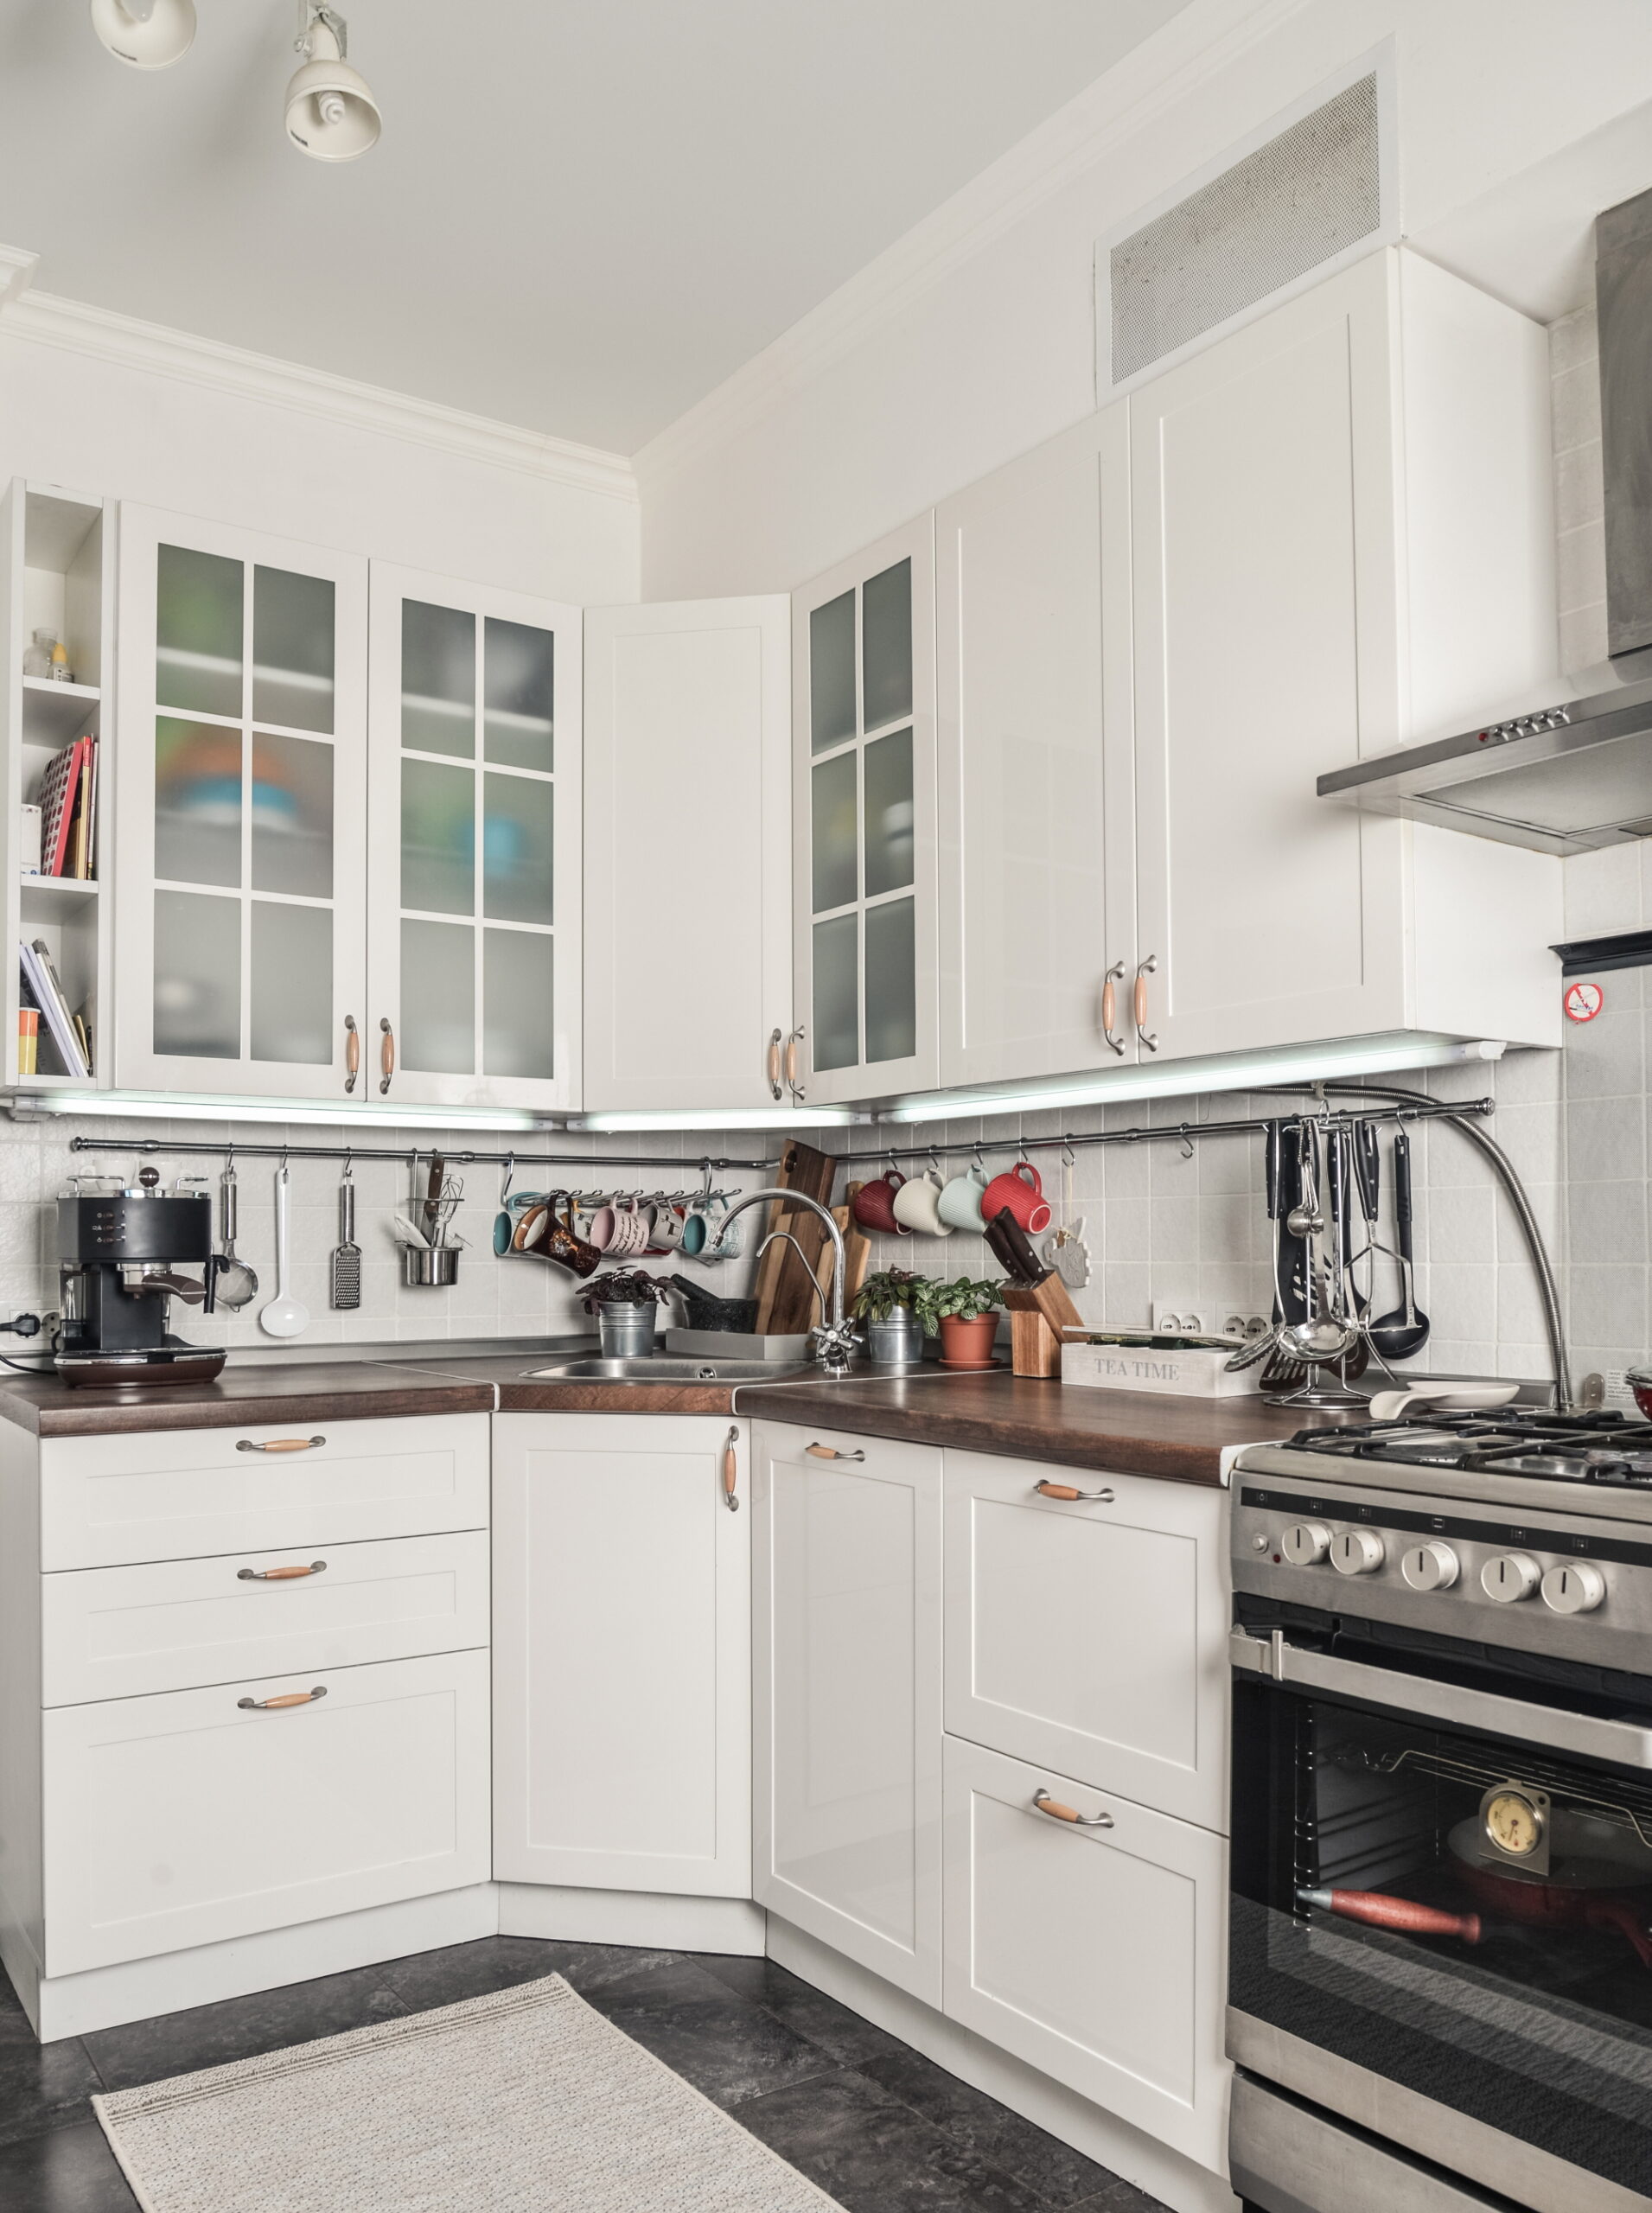 Optimize corner spaces in budget kitchens for functionality and aesthetics without overspending.